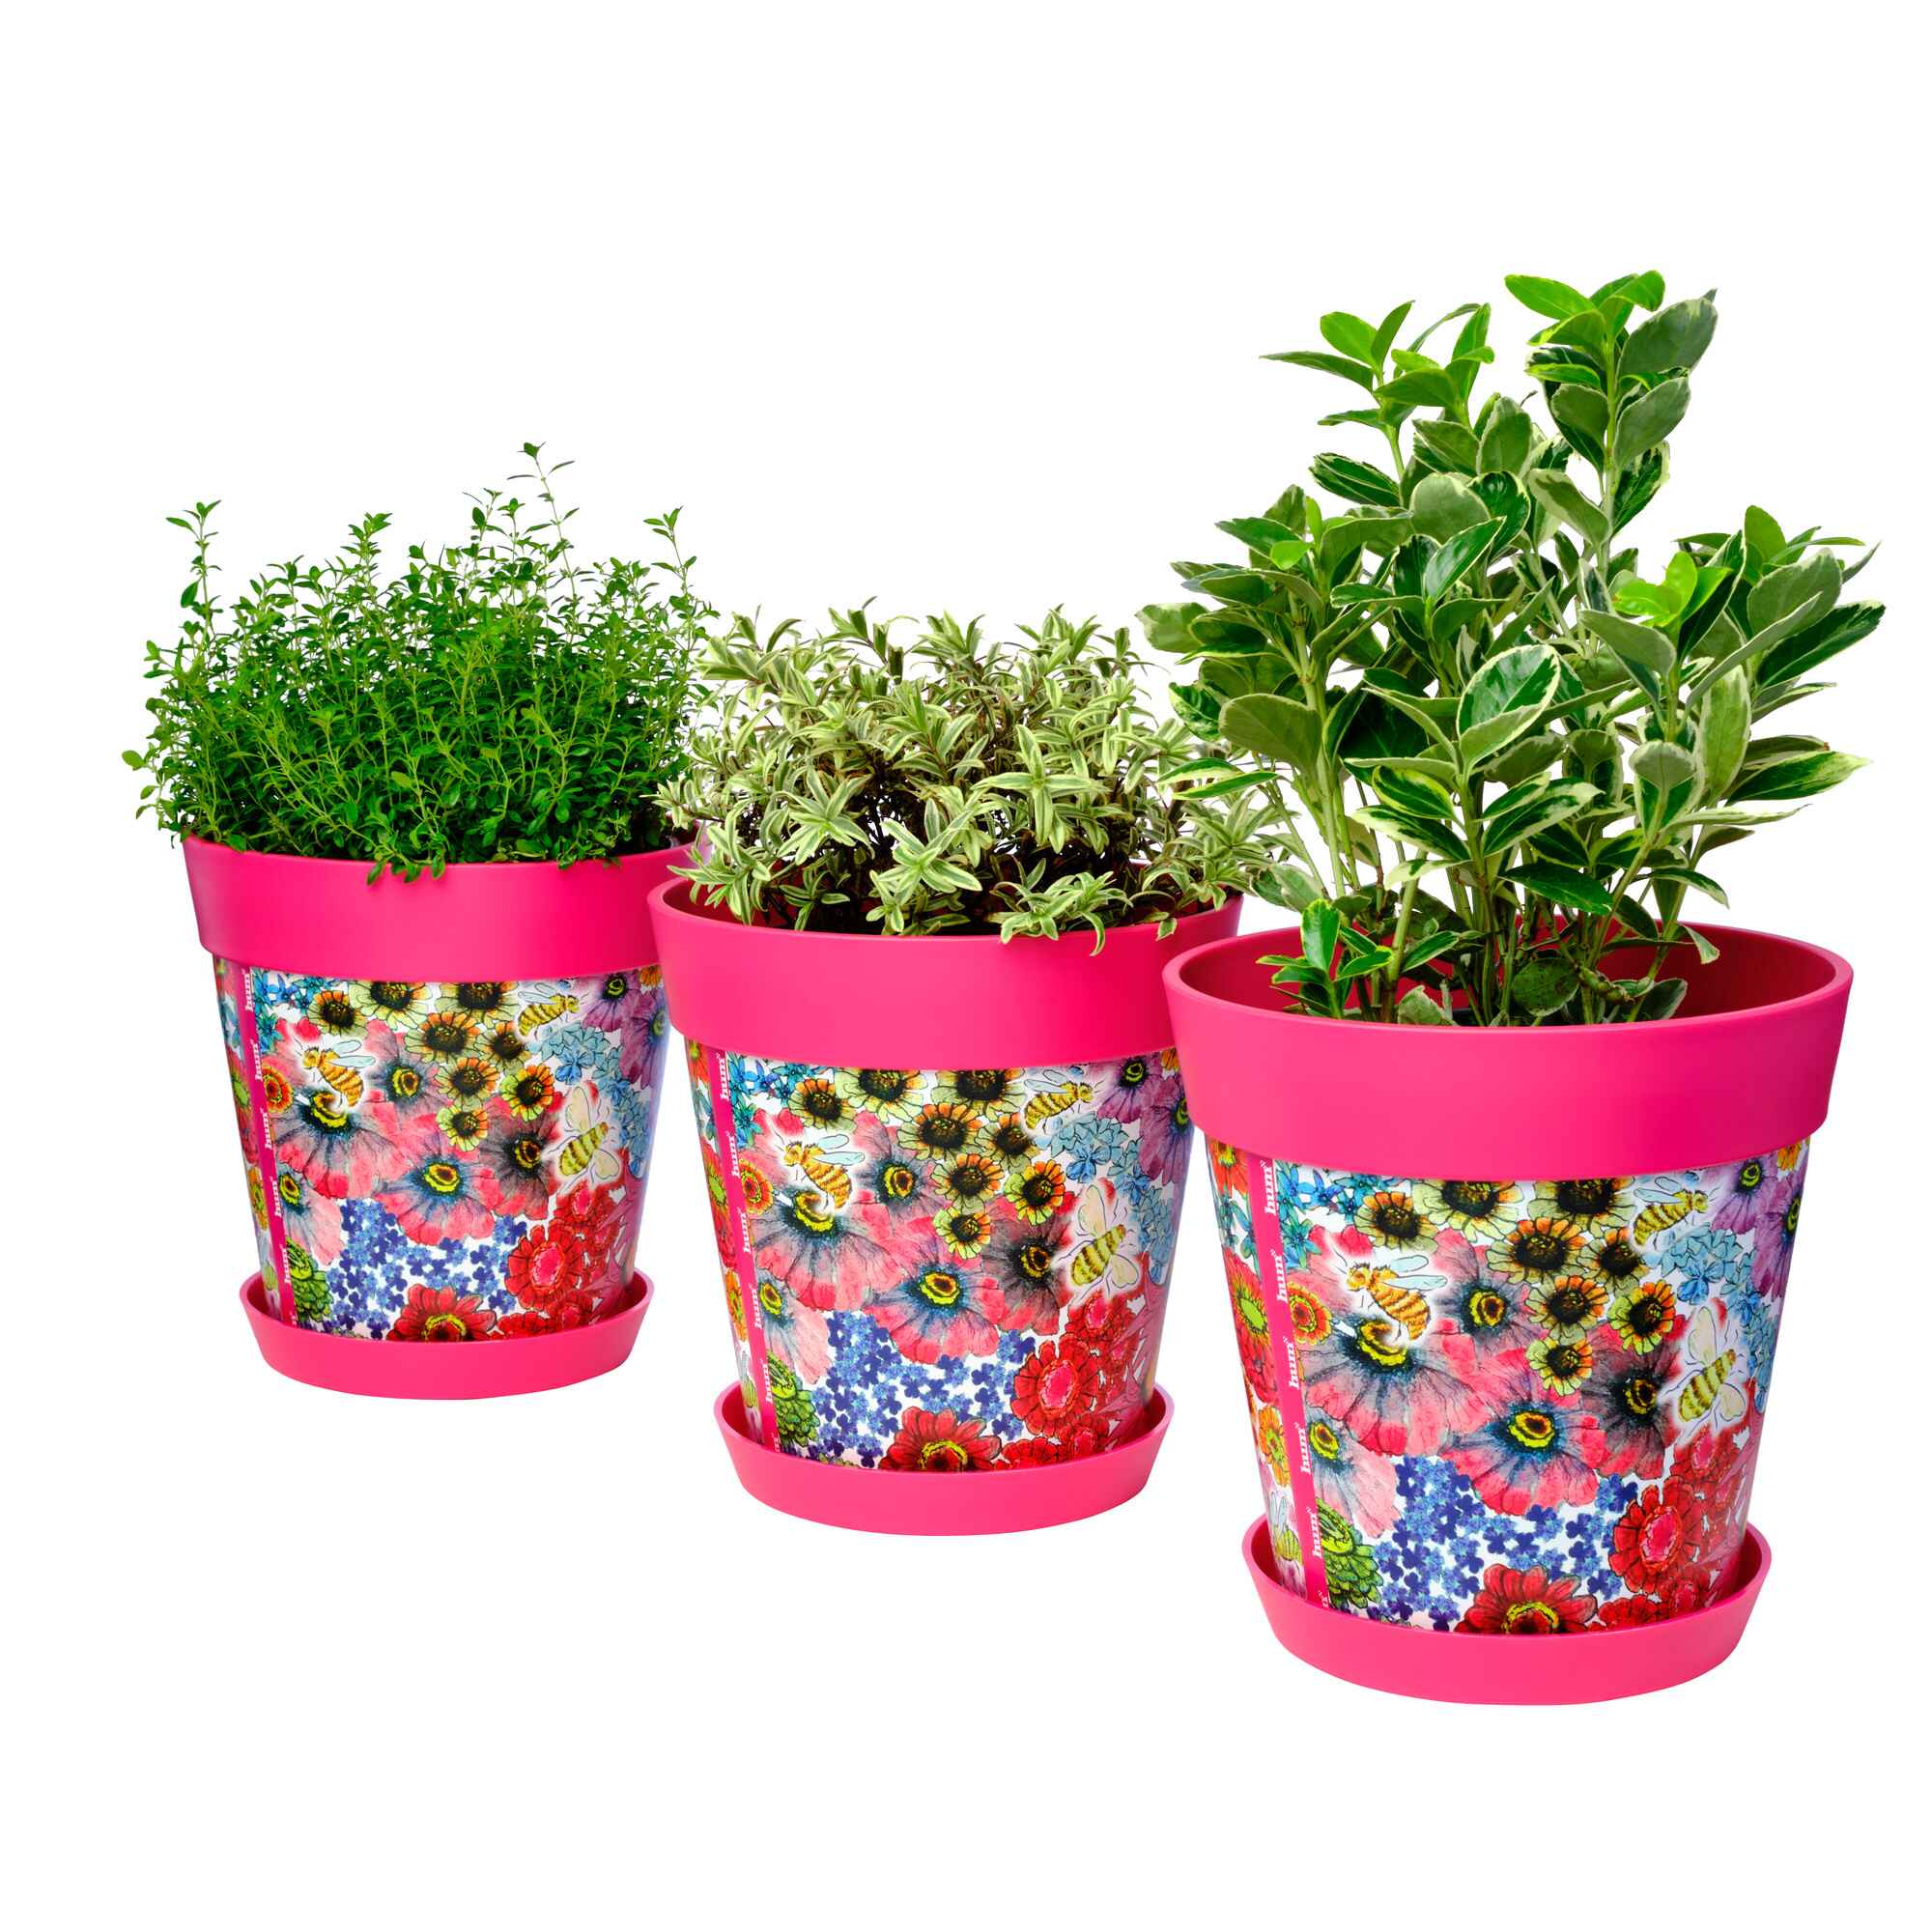 Picture of 3 Medium 22cm Planted Plastic Pink Flowers and Bees Pattern Indoor/Outdoor Flowerpots with Saucers 